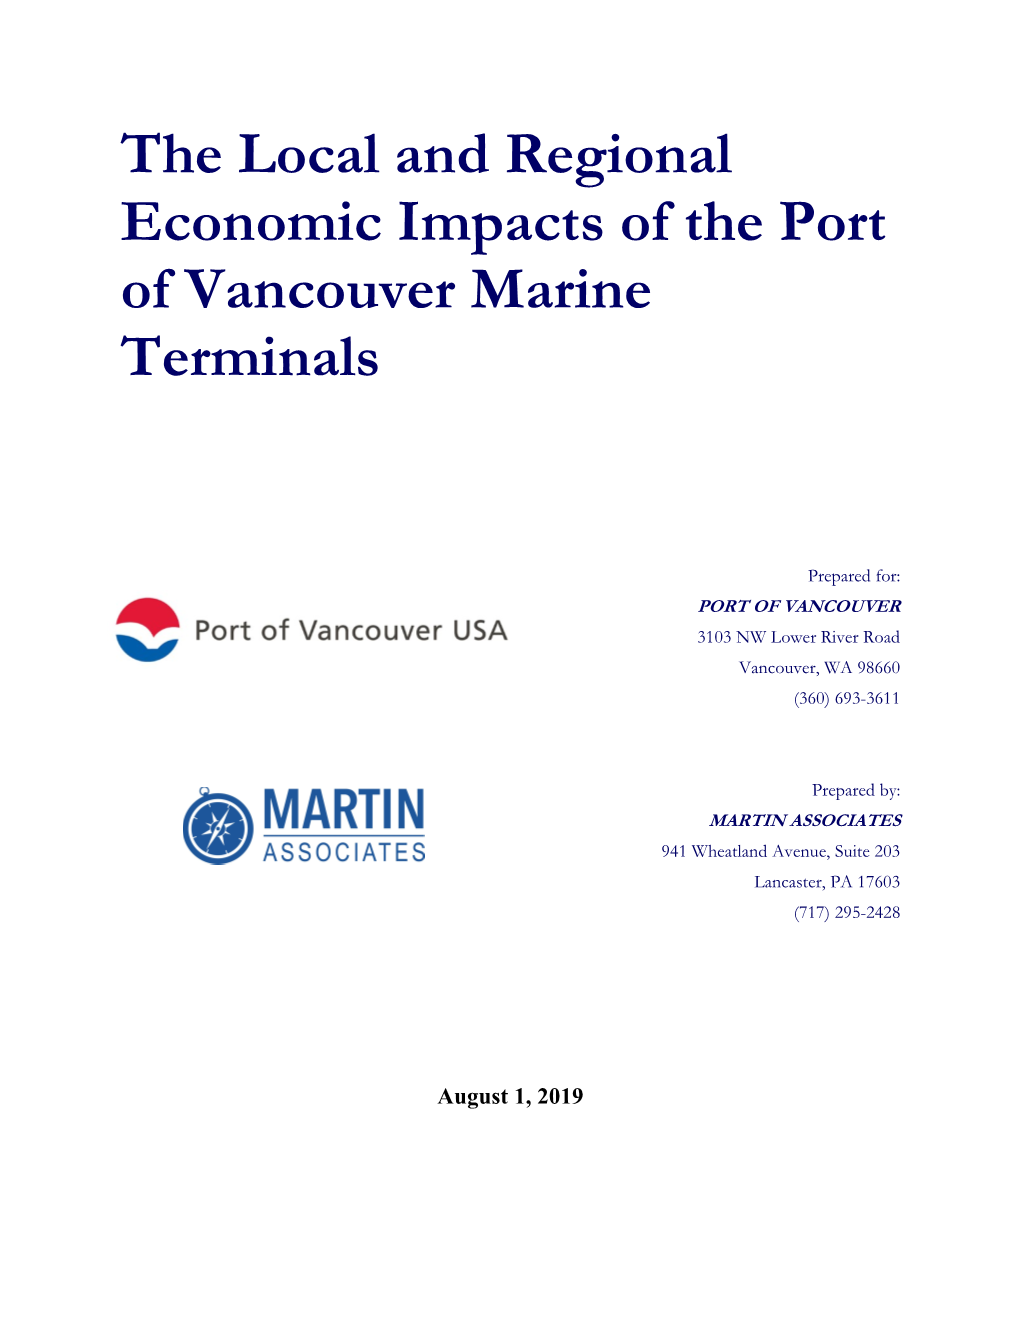 The Local and Regional Economic Impacts of the Port of Vancouver Marine Terminals